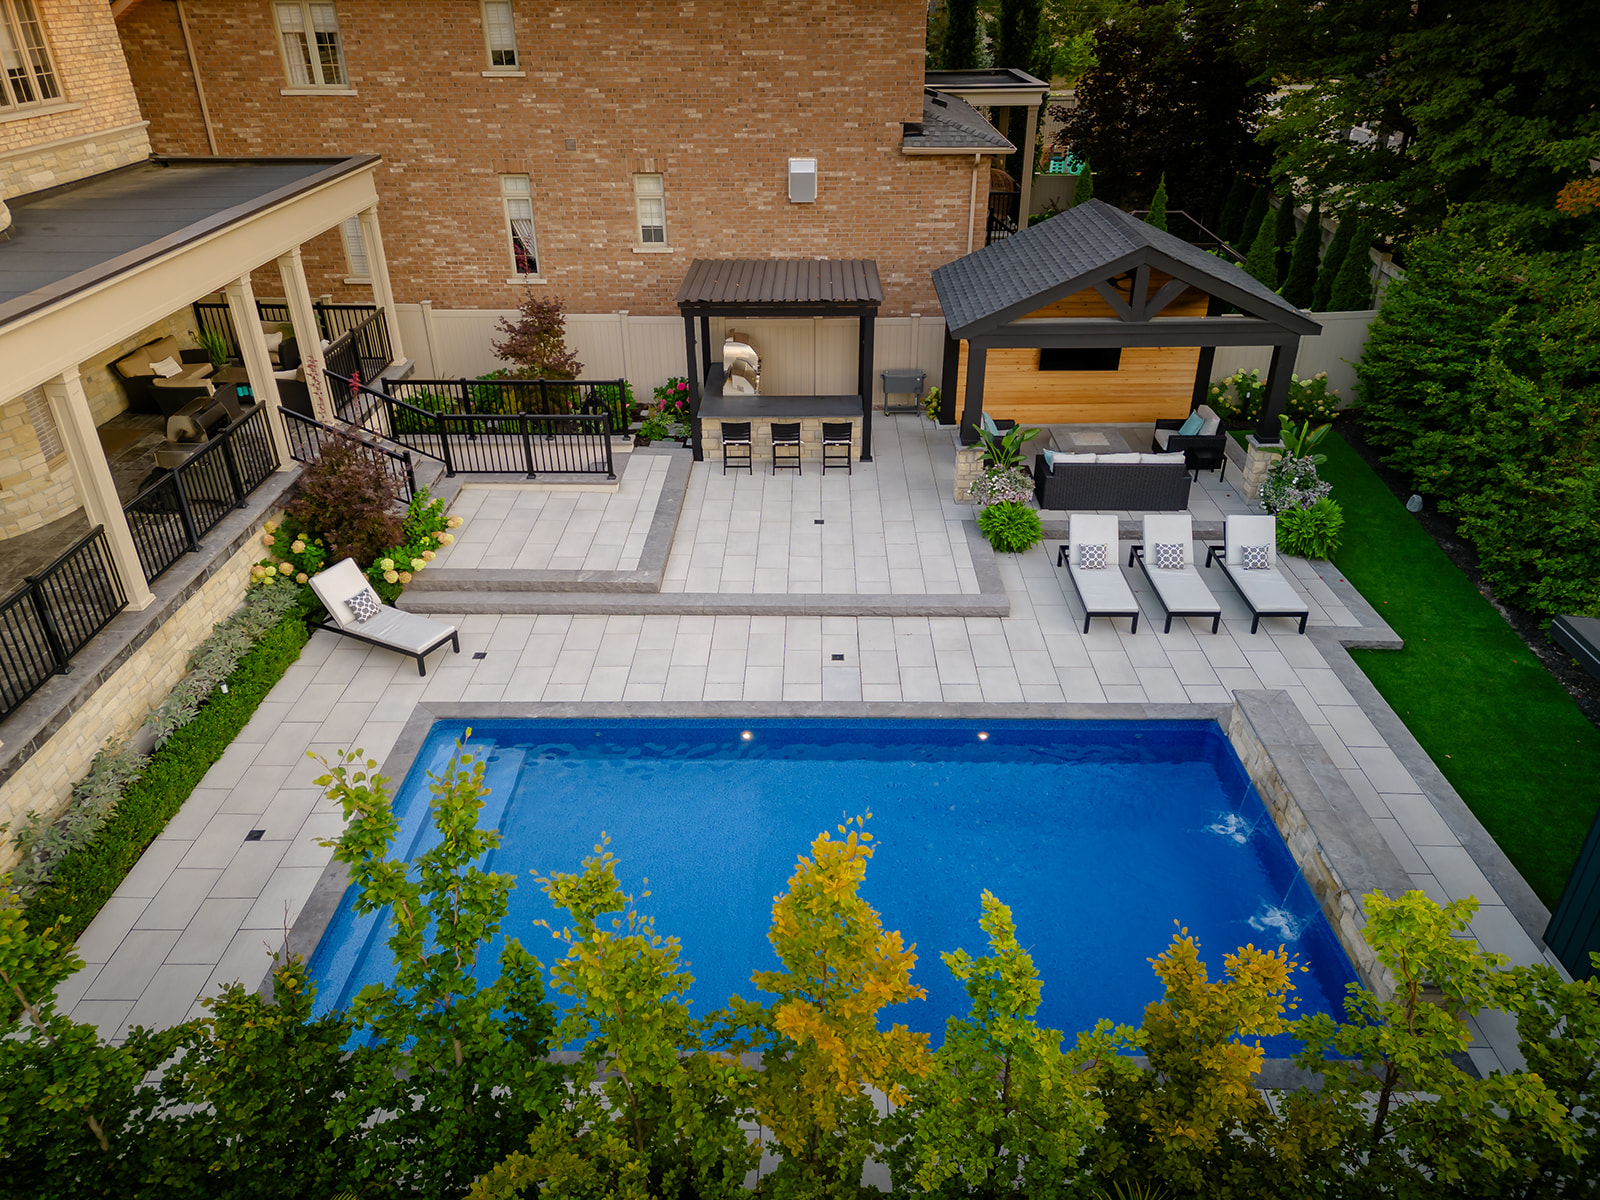 Drone shot of the inground pool and outdoor furniture.